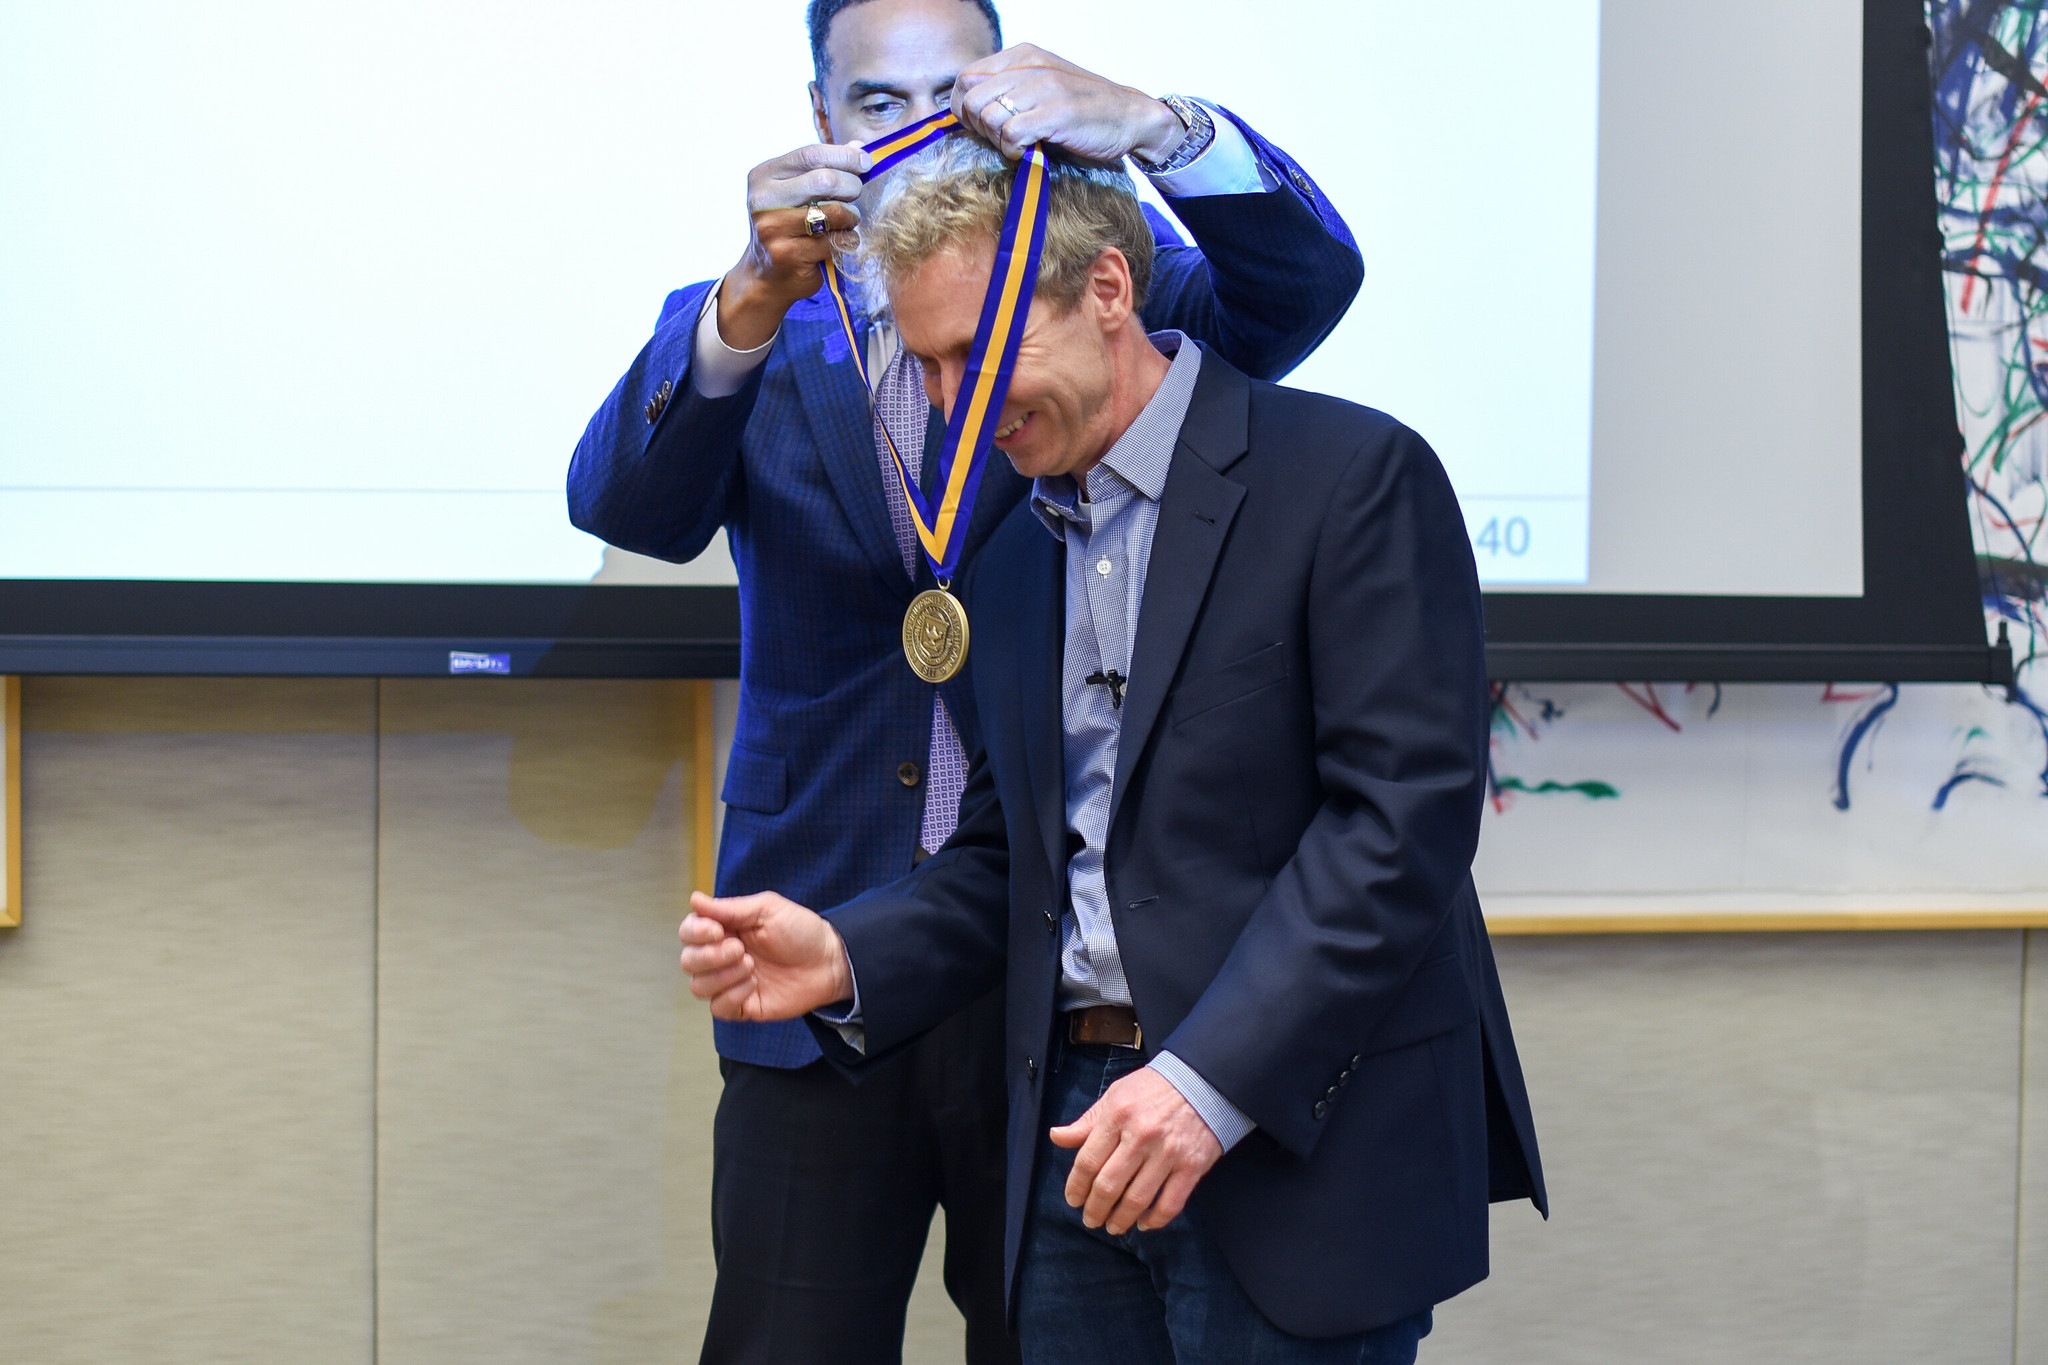 Dean Gallimore presents the ceremonial professorship medal to Prof. Blaauw.